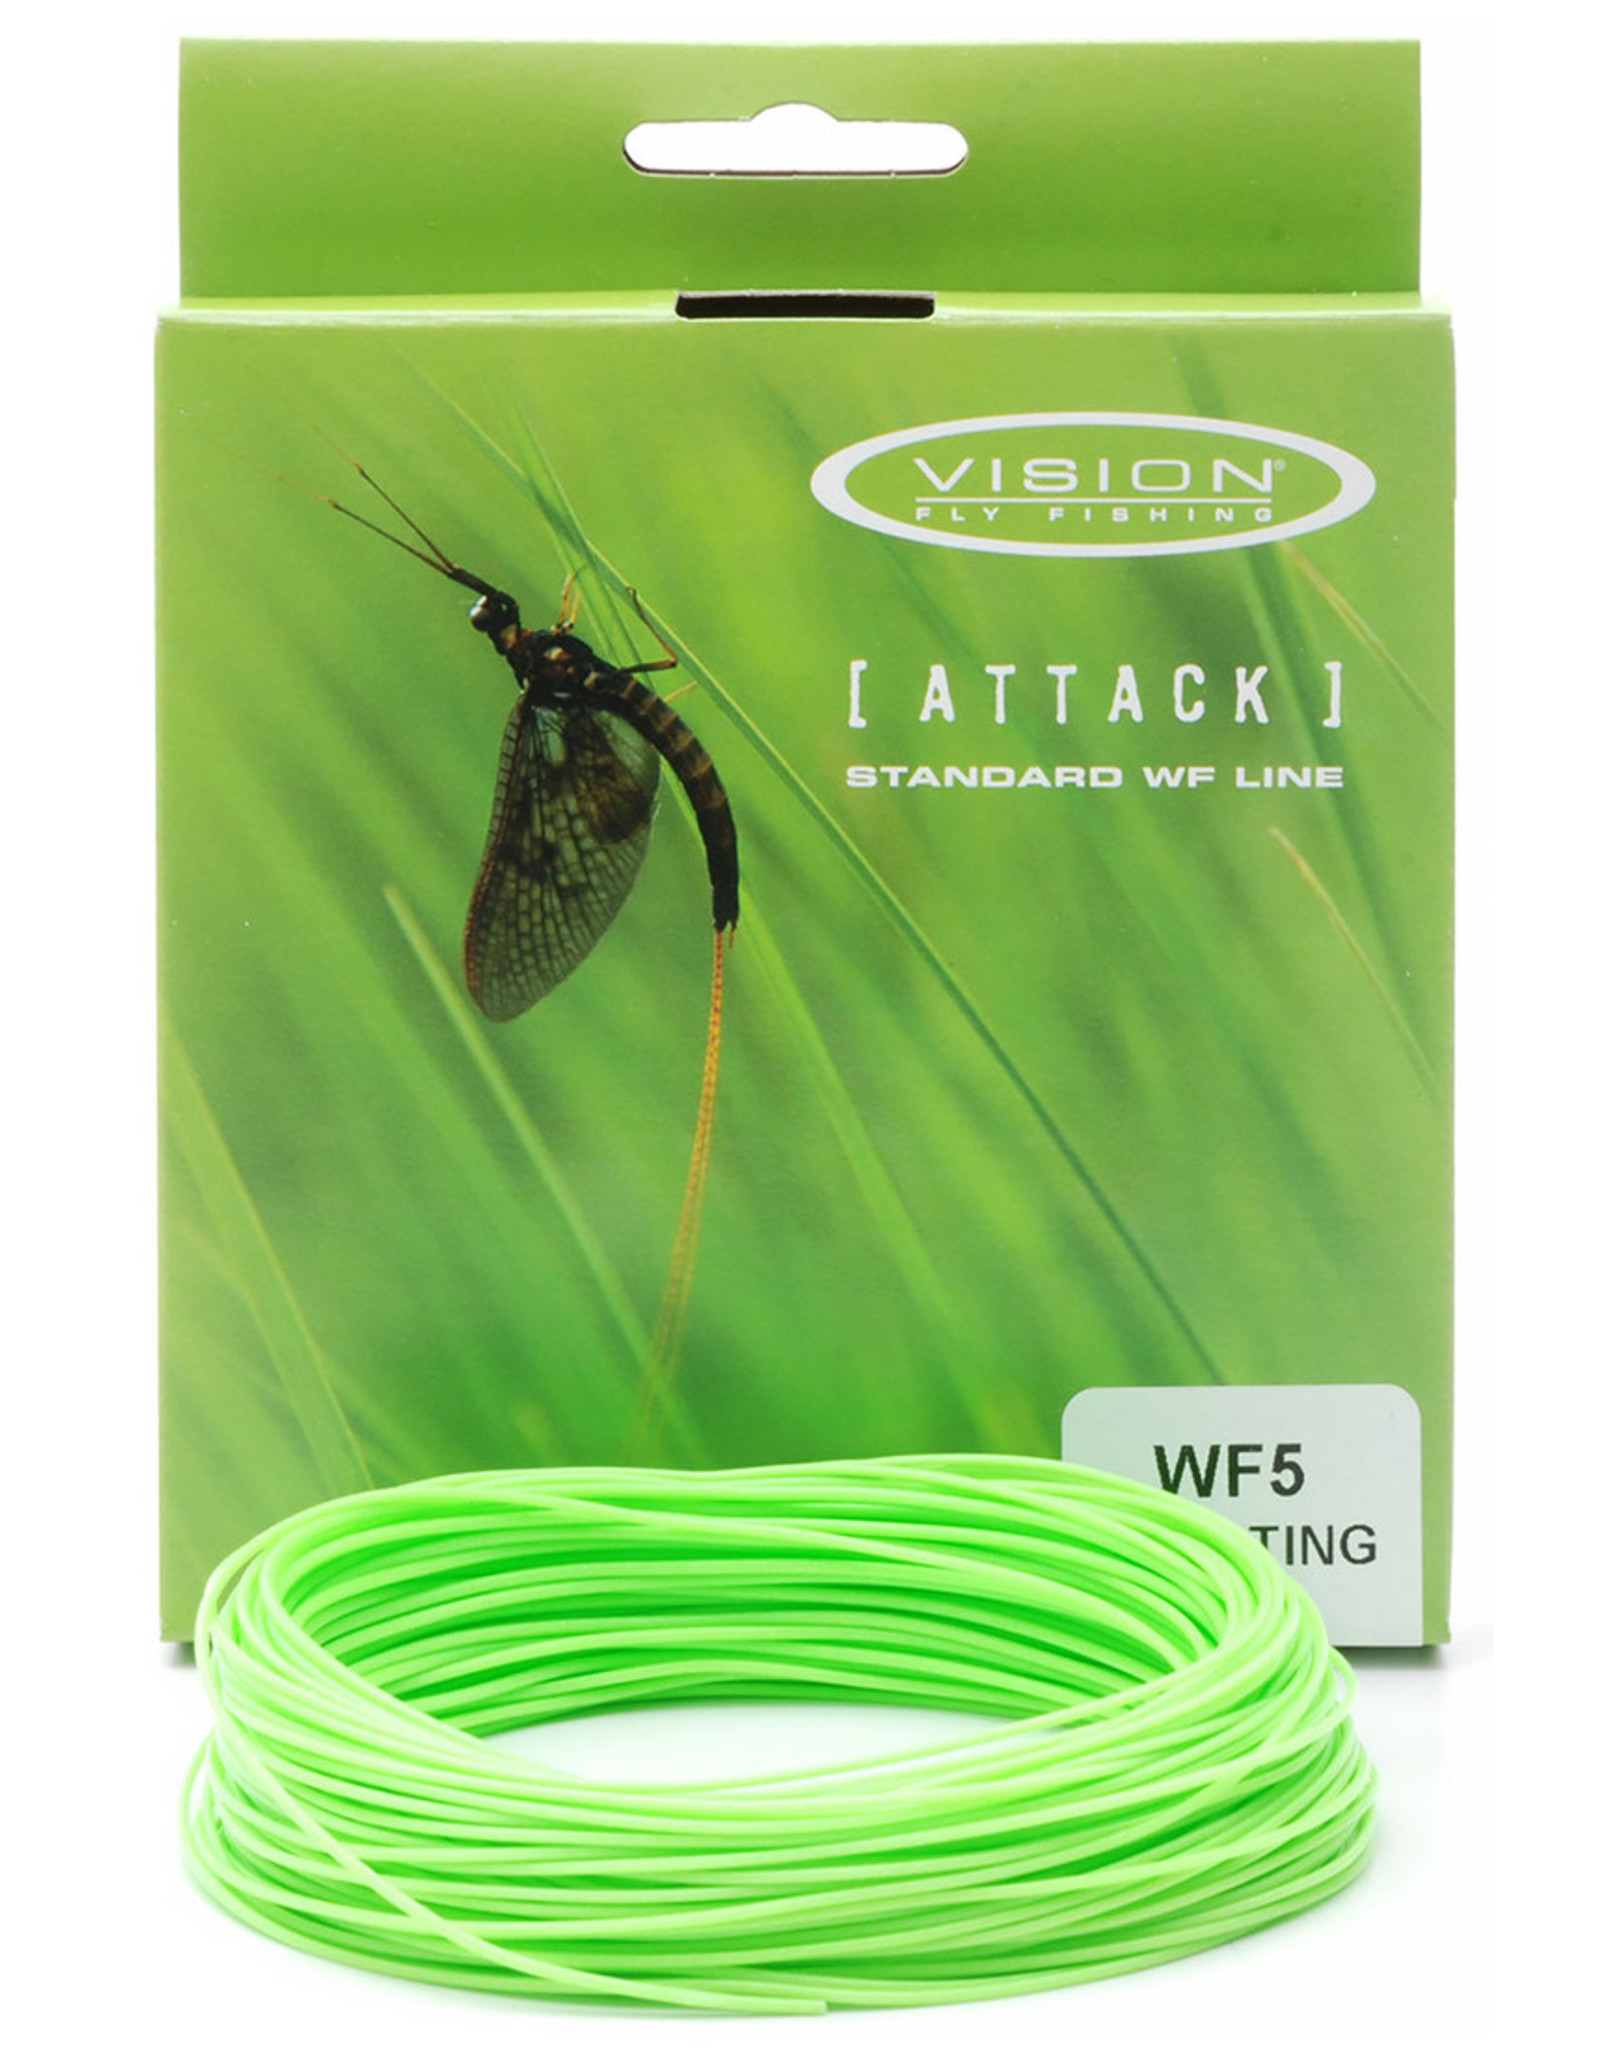 ATTACK WF FLOATING FLY LINE - Reid's Fly Shop